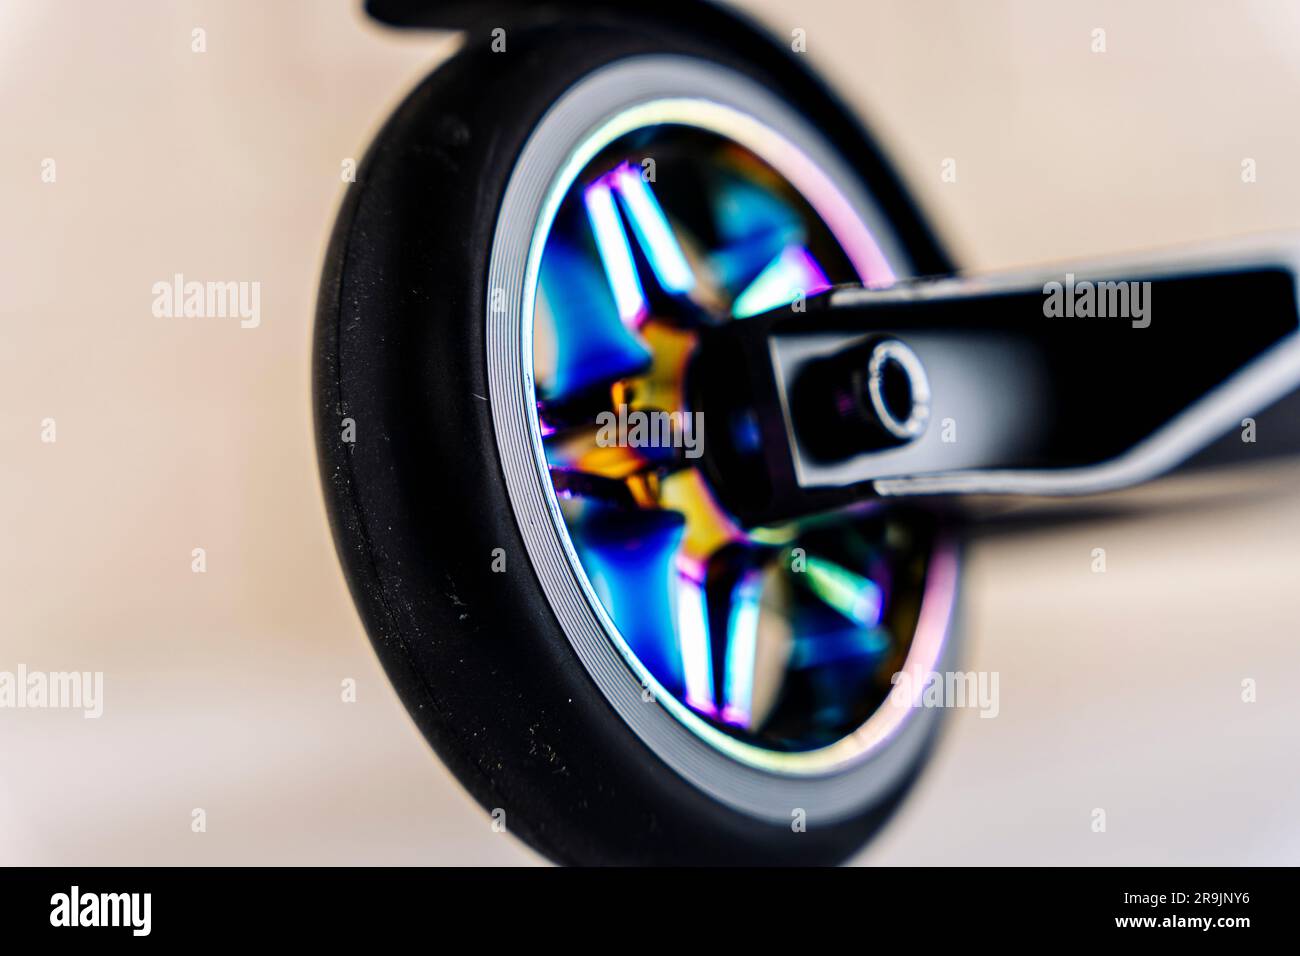 Sæt tøj væk Footpad Gamle tider The rear wheel and brake of a Stunt scooter with rainbow-colored wheels.  extreme skating in the skatepark and on the ramp. Details of the scooter.  Rep Stock Photo - Alamy